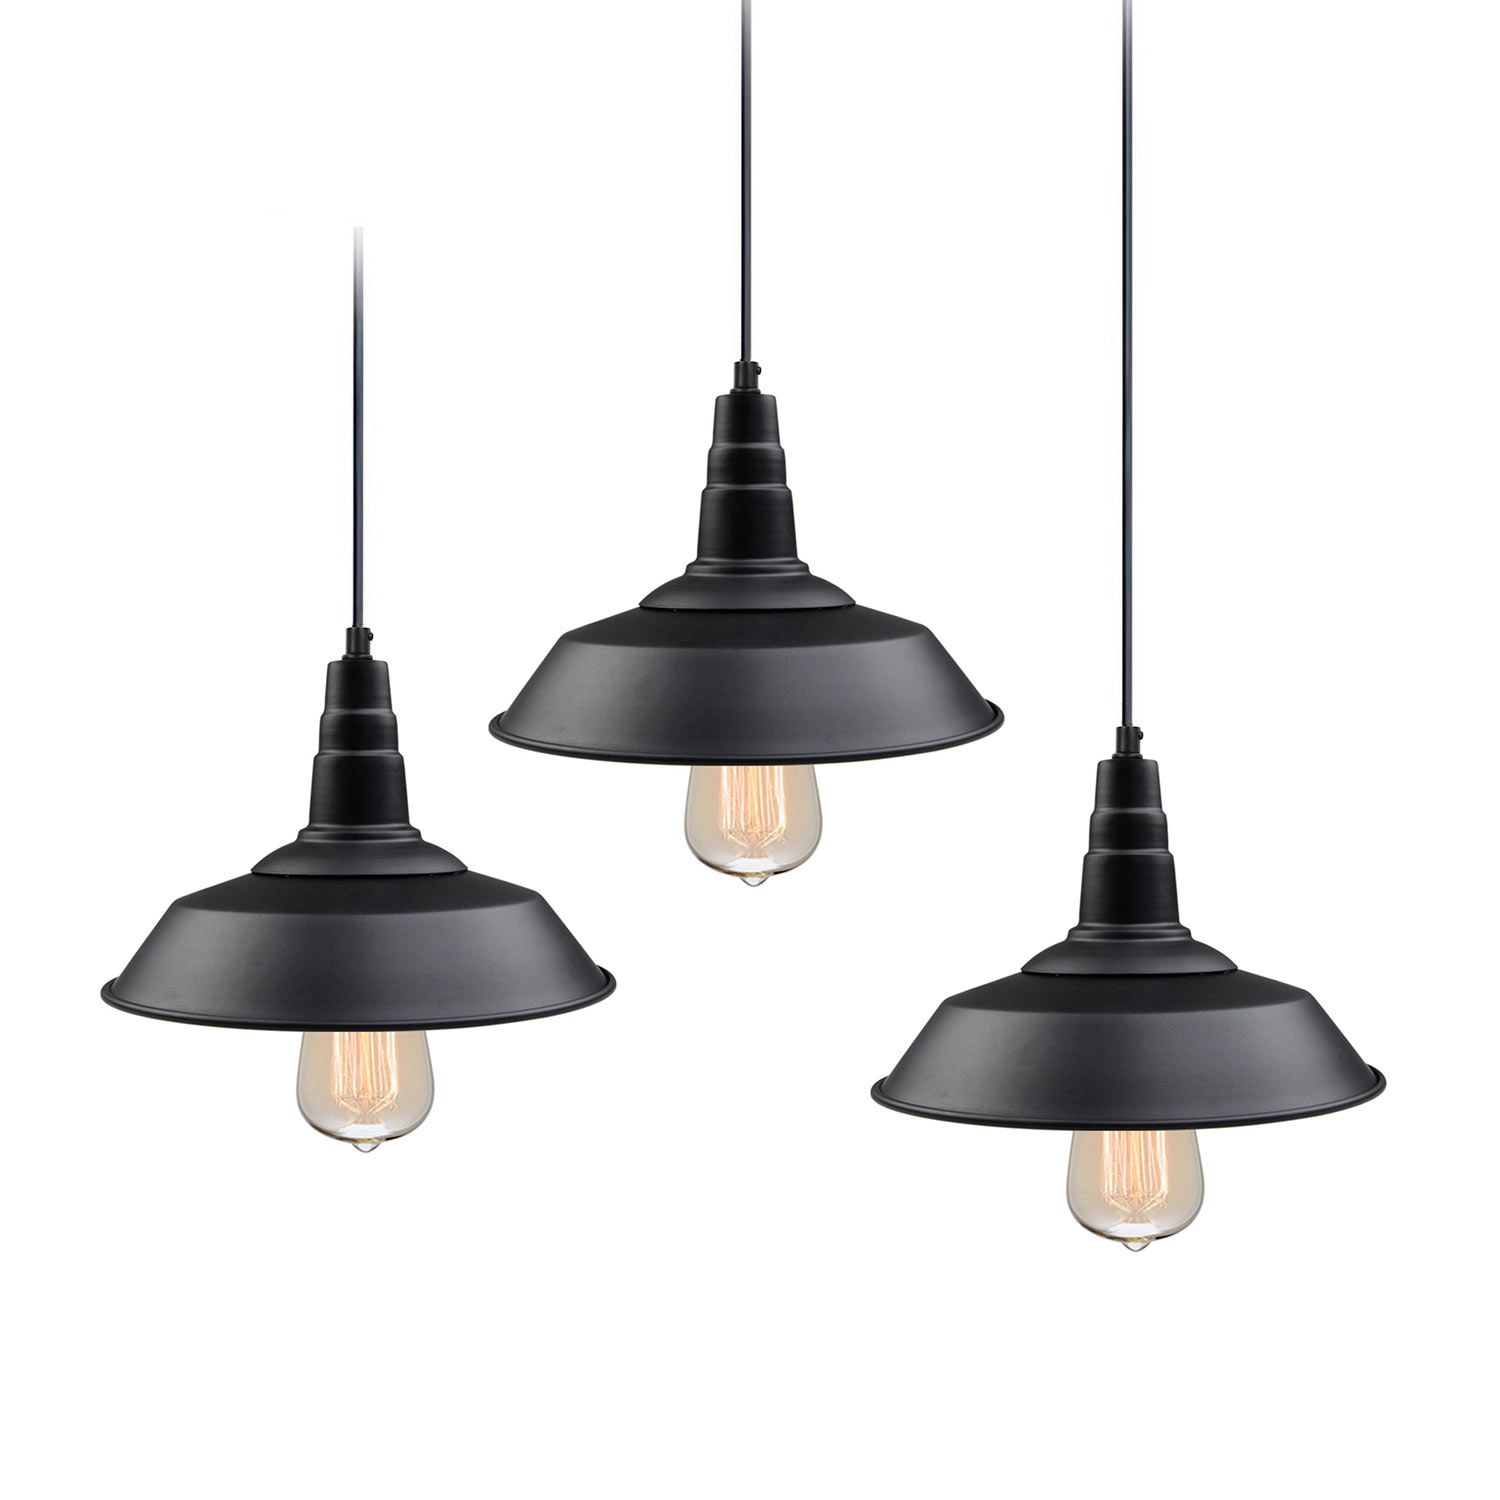 Lnc 3 Pack Black Indoor Industrial Ceiling Hanging Lamp Intended For Black And Gold Kitchen Island Light Pendant (View 9 of 15)